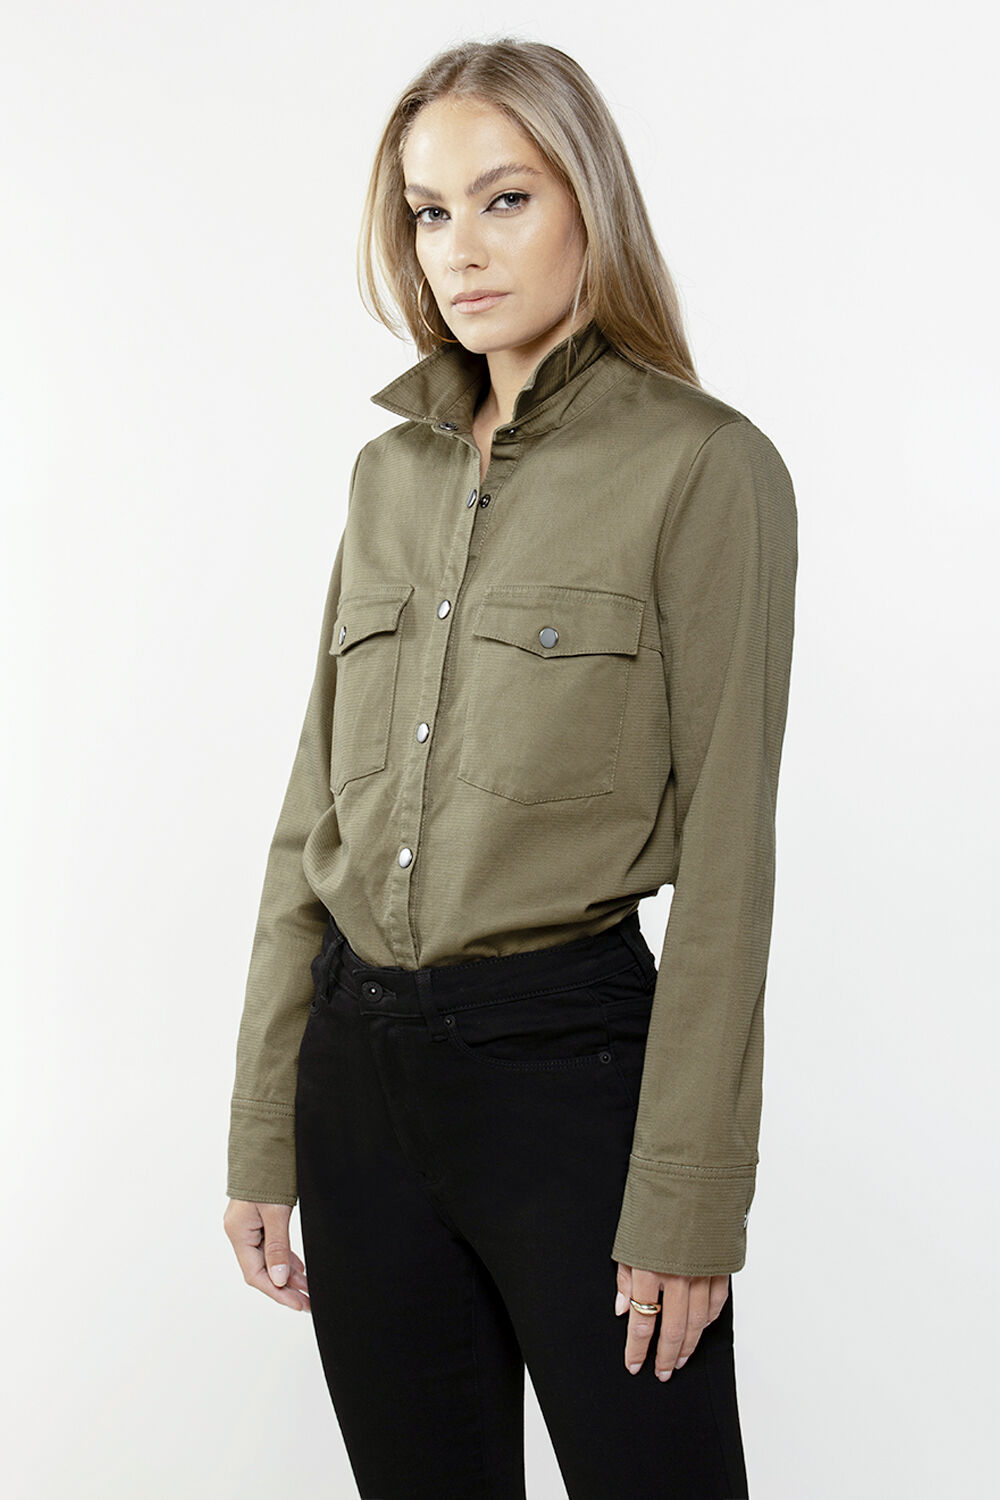 UTILITY SHIRT in colour IVY GREEN